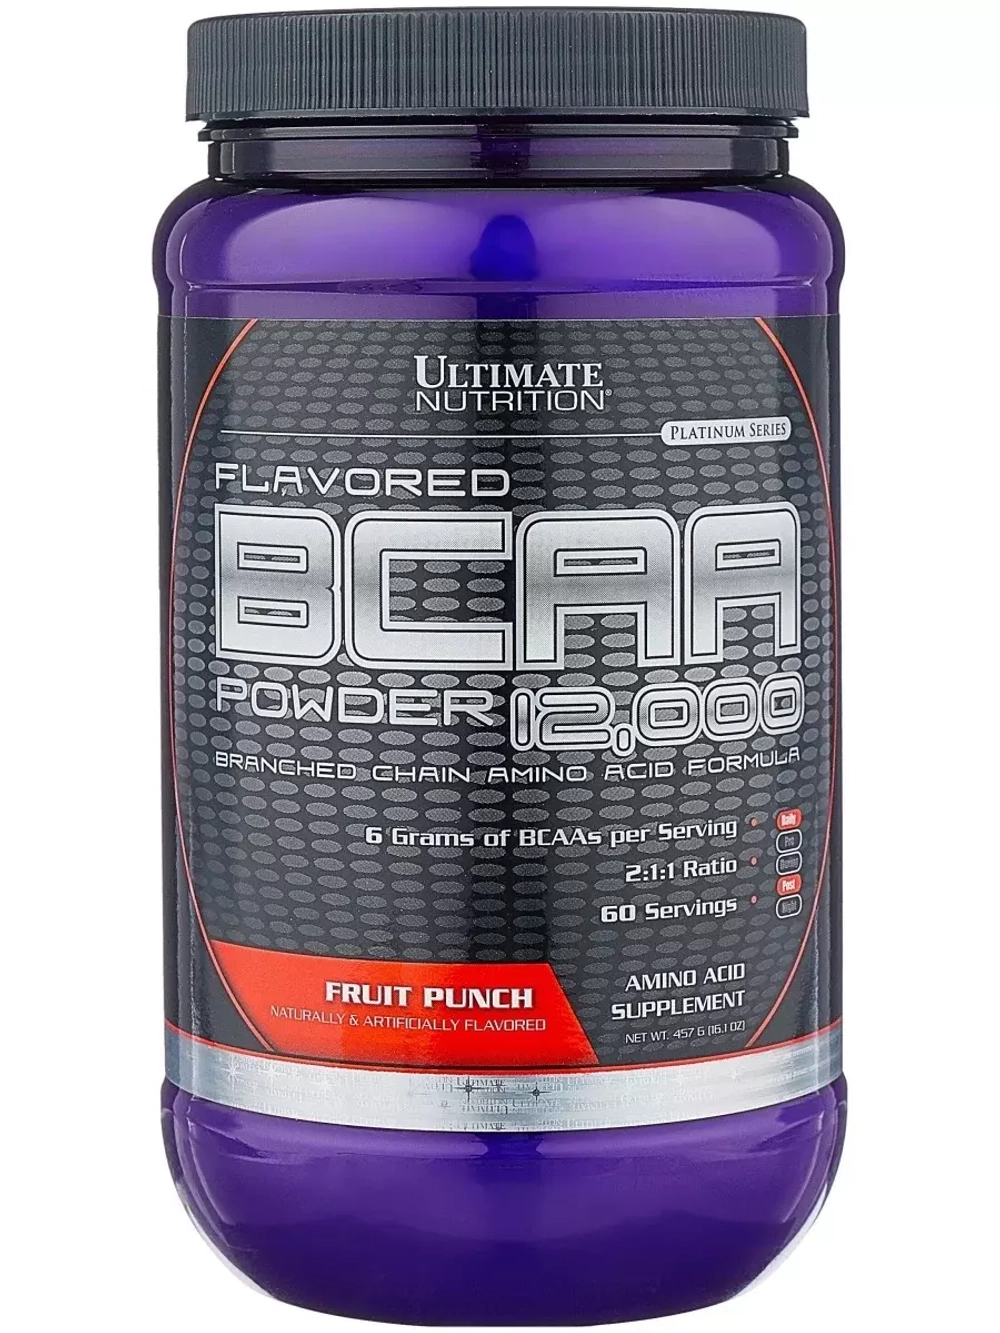 BCAA 12000 Powder Flavored (Ultimate Nutrition)